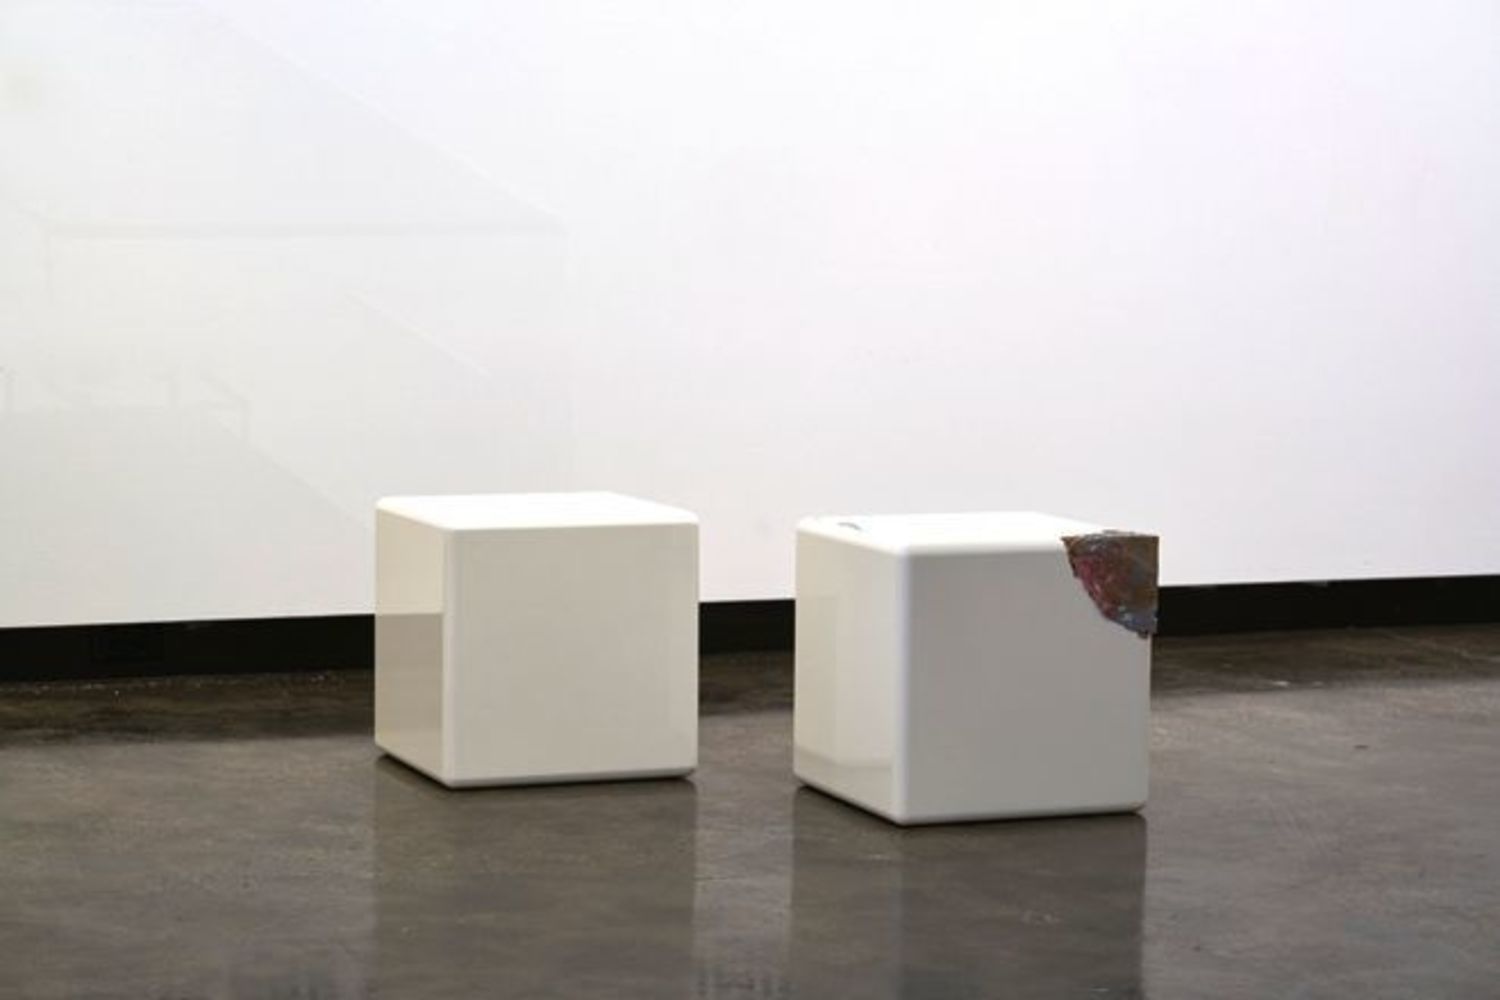 Two white cubes